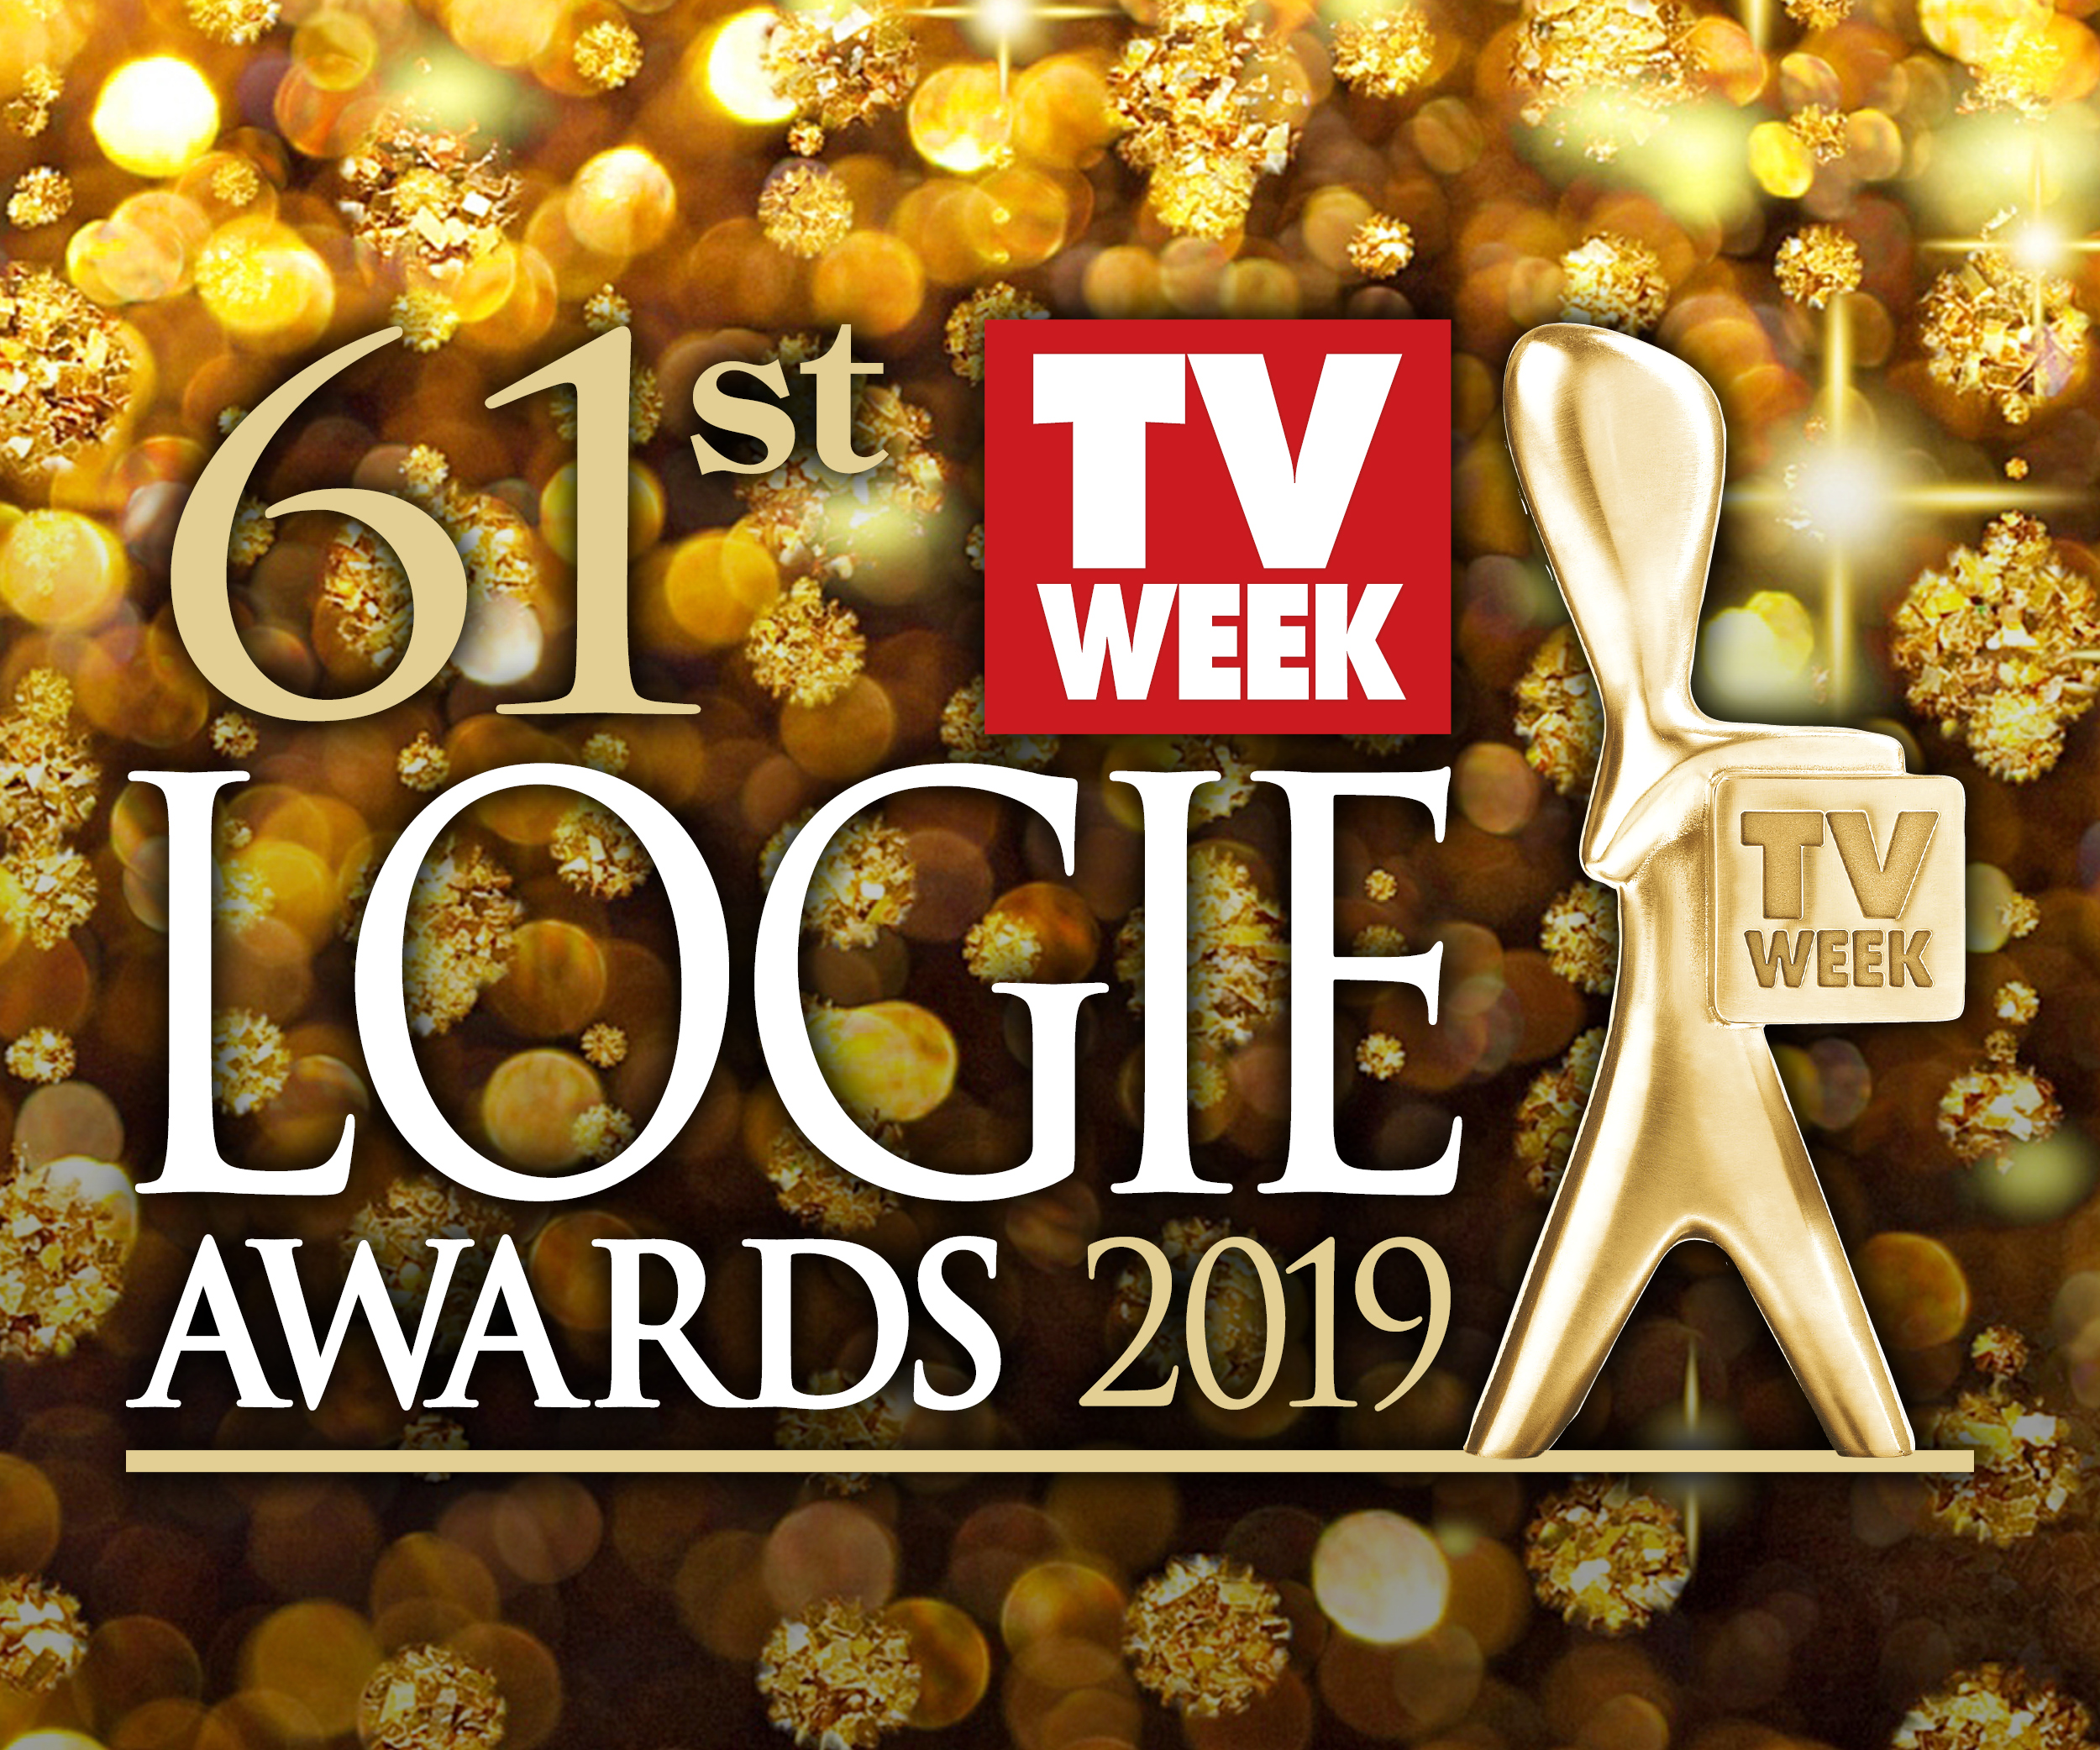 The full list of nominees for the 2019 TV WEEK Logie Awards